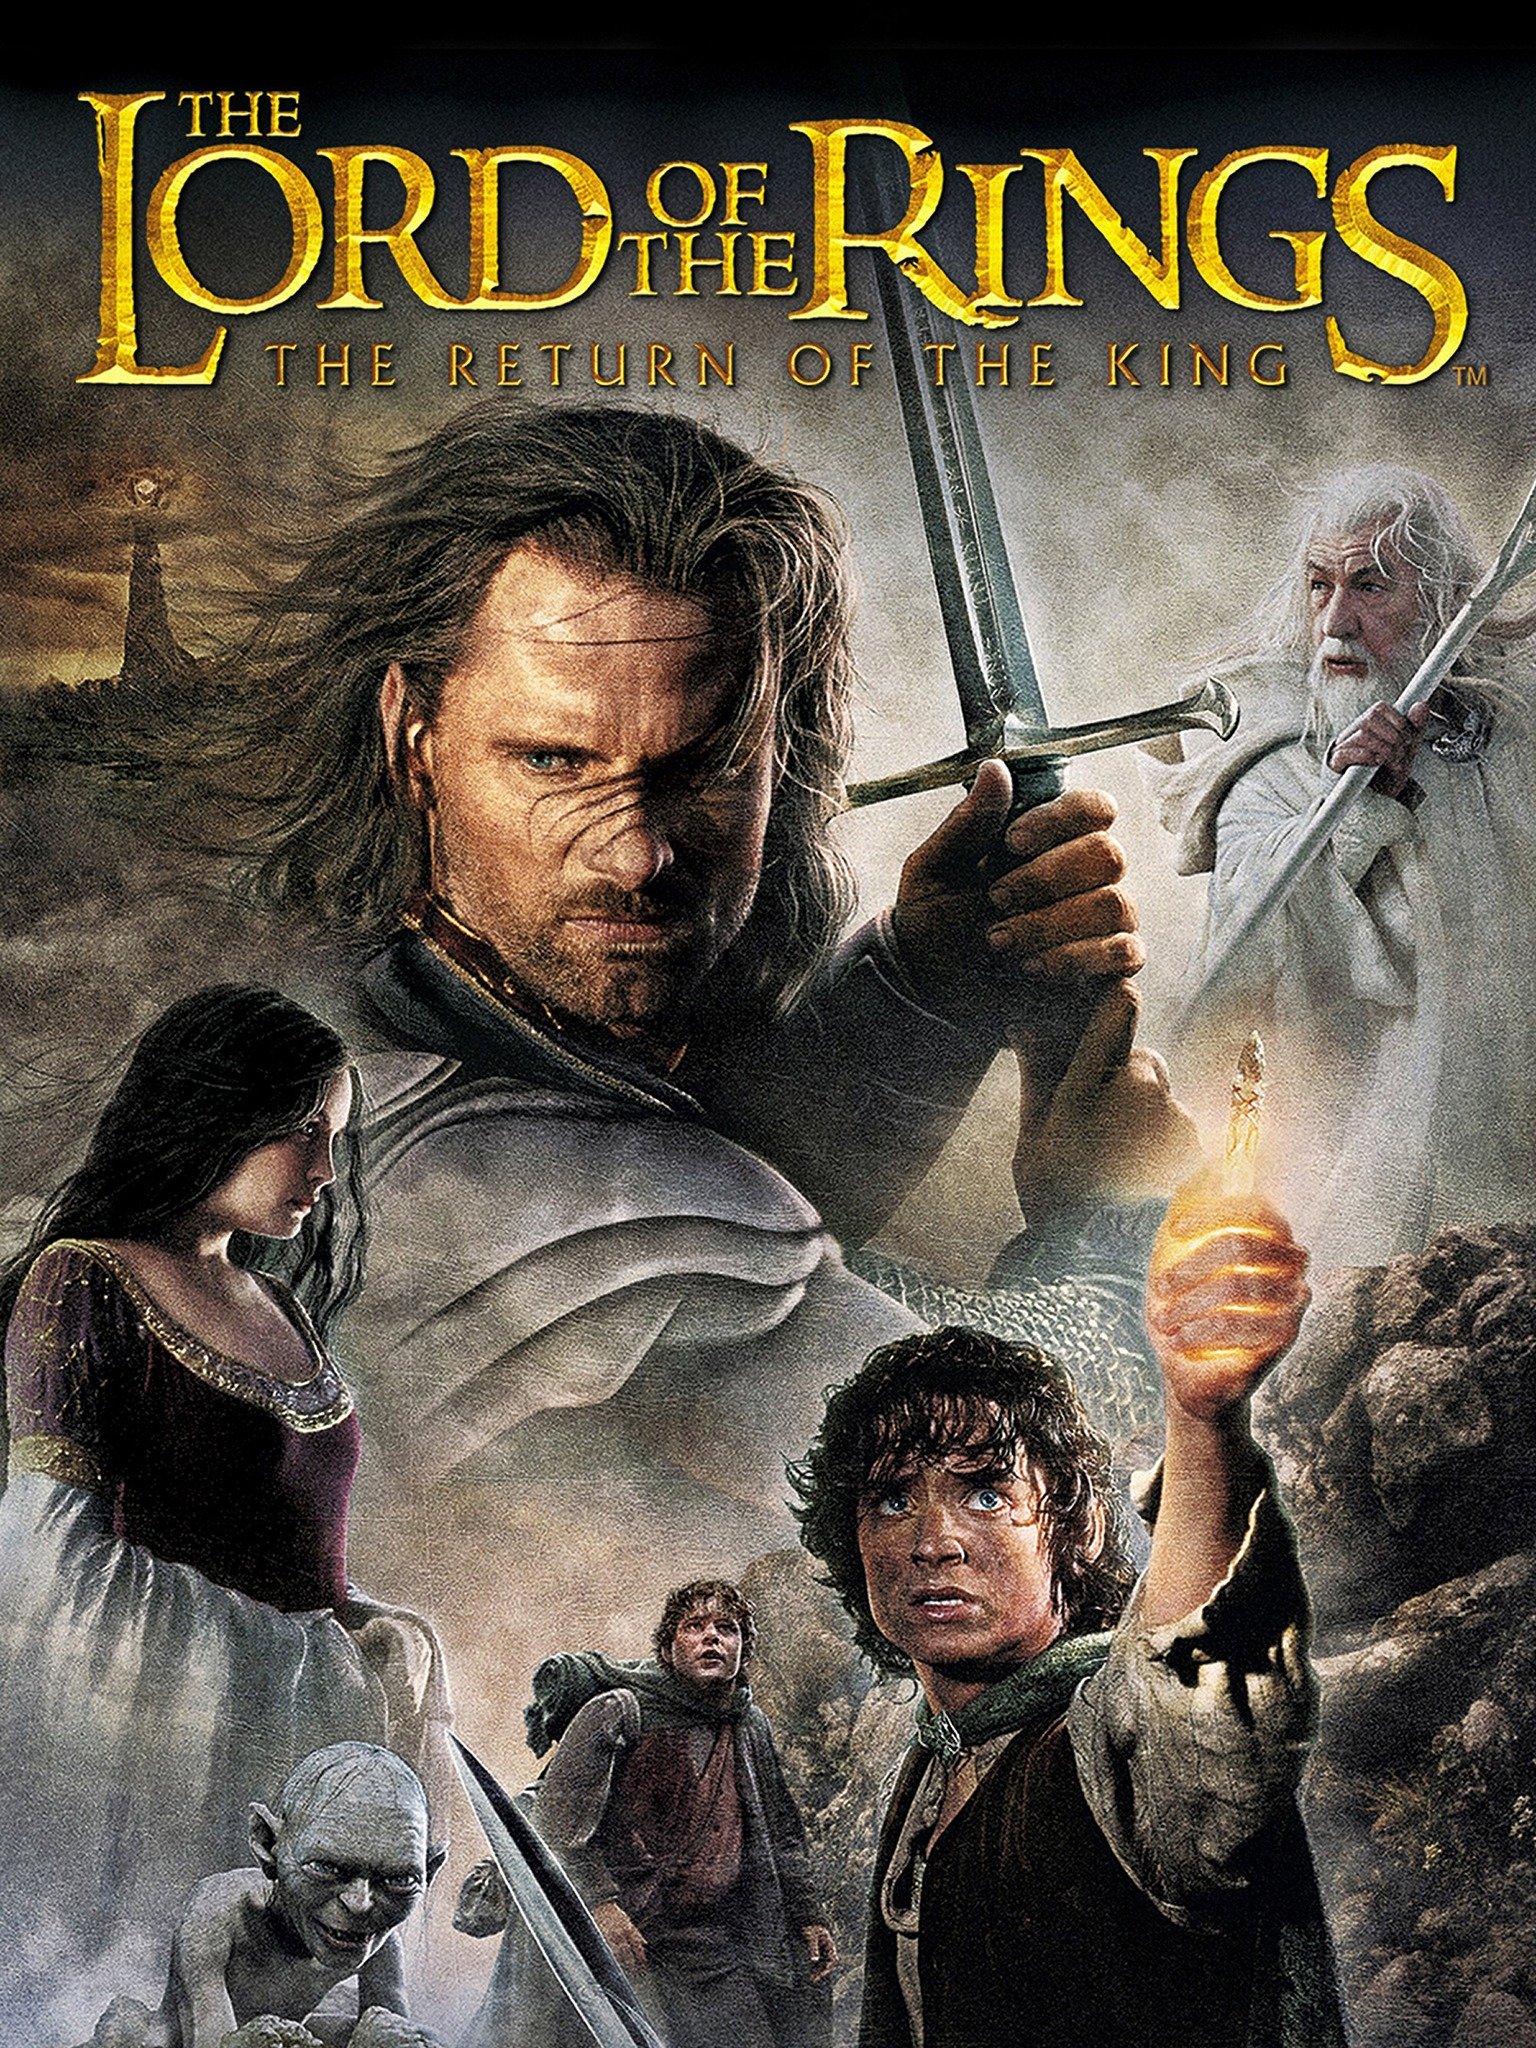 the lord of the rings trilogy extended edition 1080p mp4